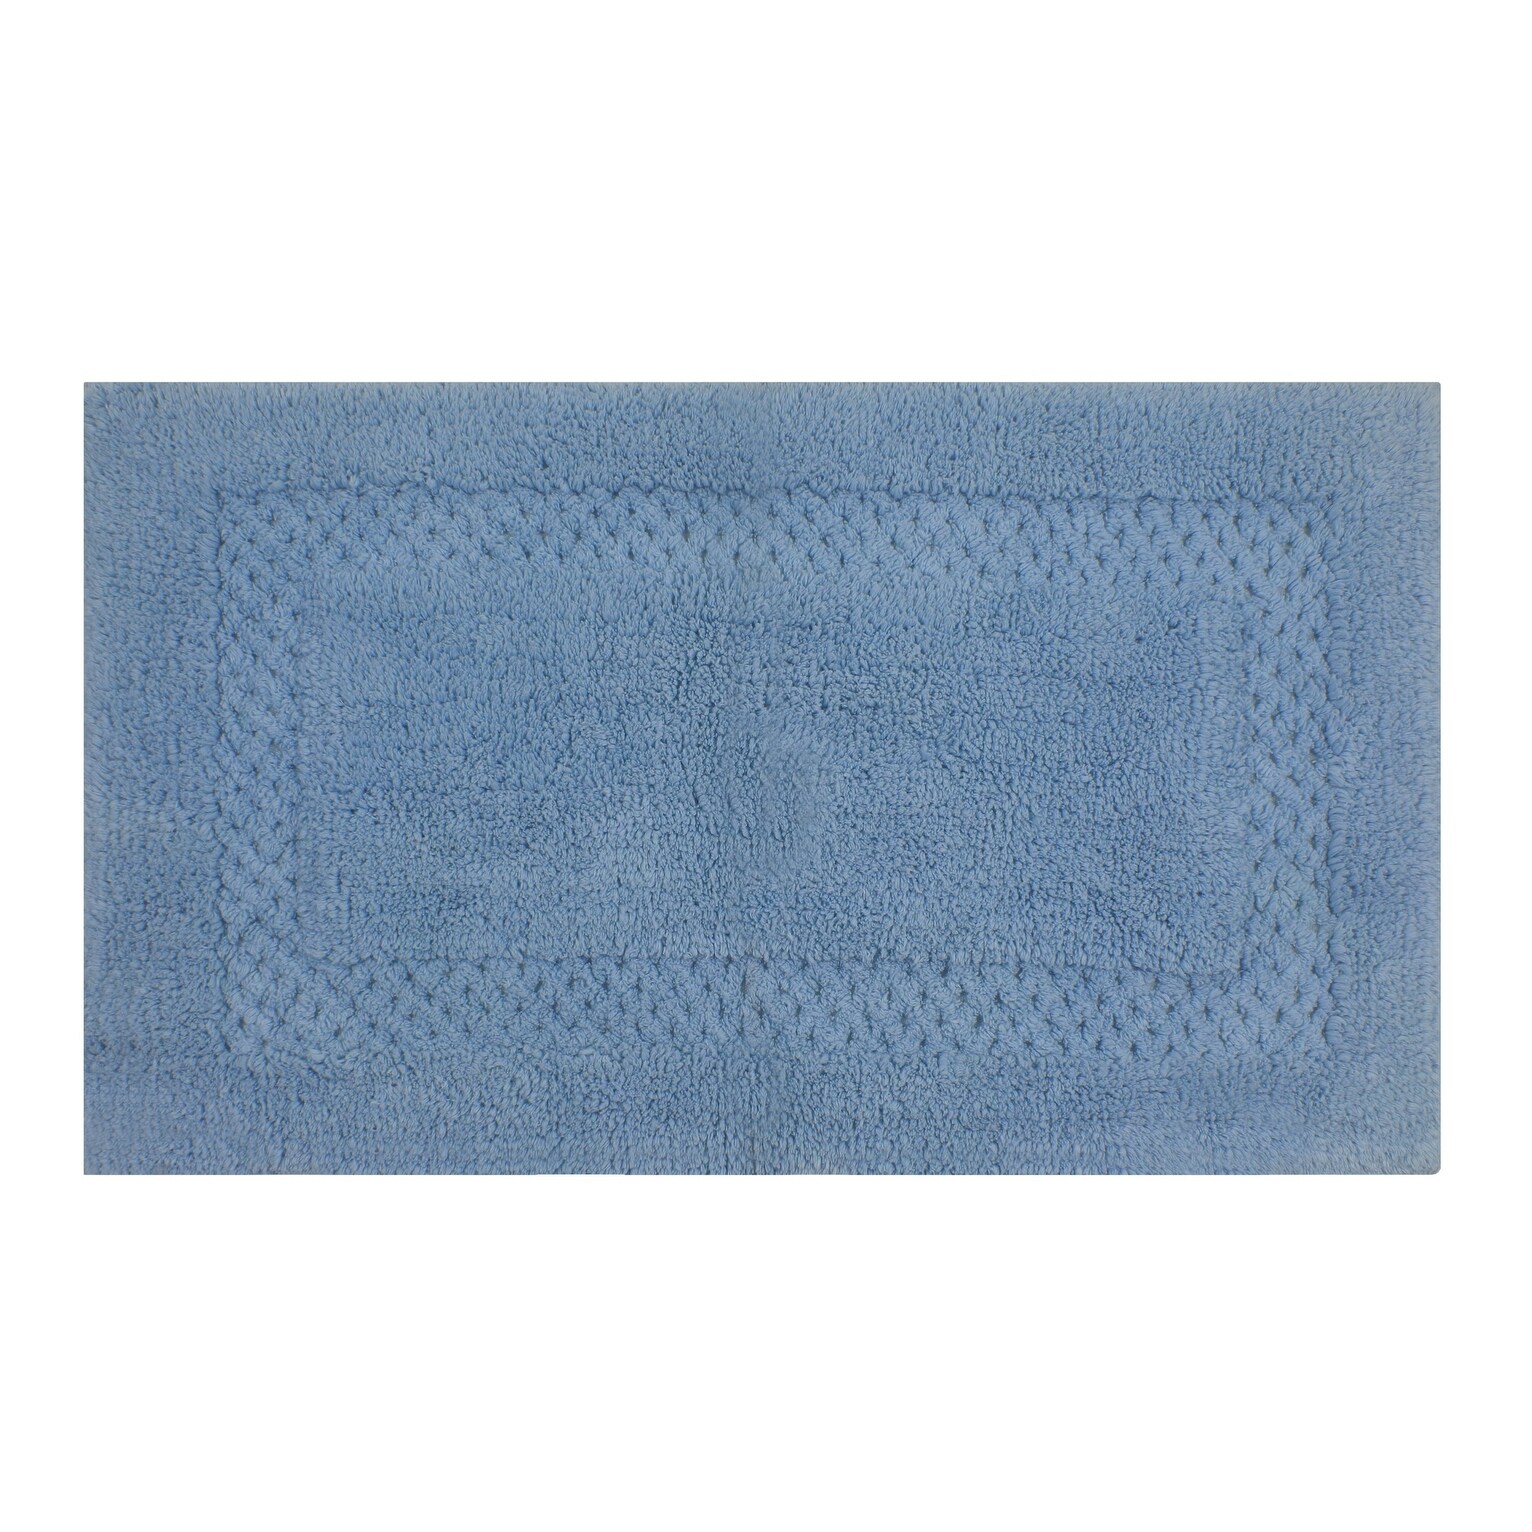 https://ak1.ostkcdn.com/images/products/is/images/direct/a1653fef0bb062a109081a6551e3d96f67757fd1/Home-Weavers-Classy-Bathmat-Absorbent-Cotton-Machine-Washable-Bath-Rug.jpg